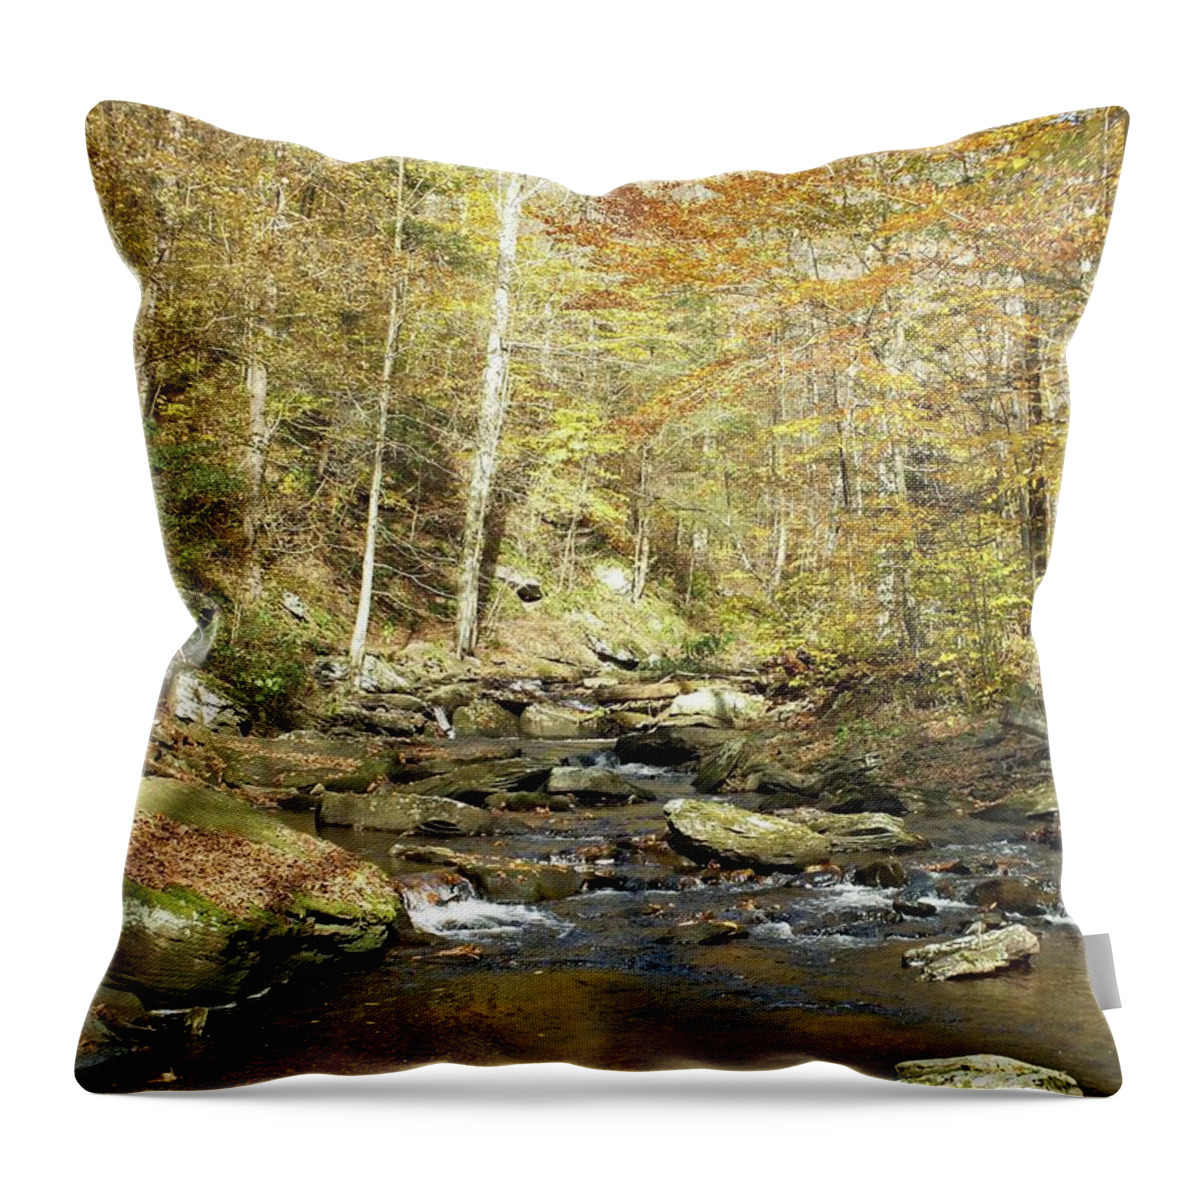 Ricketts Glen State Park Throw Pillow featuring the photograph Nature's Finest 5 - Ricketts Glen by Cindy Treger